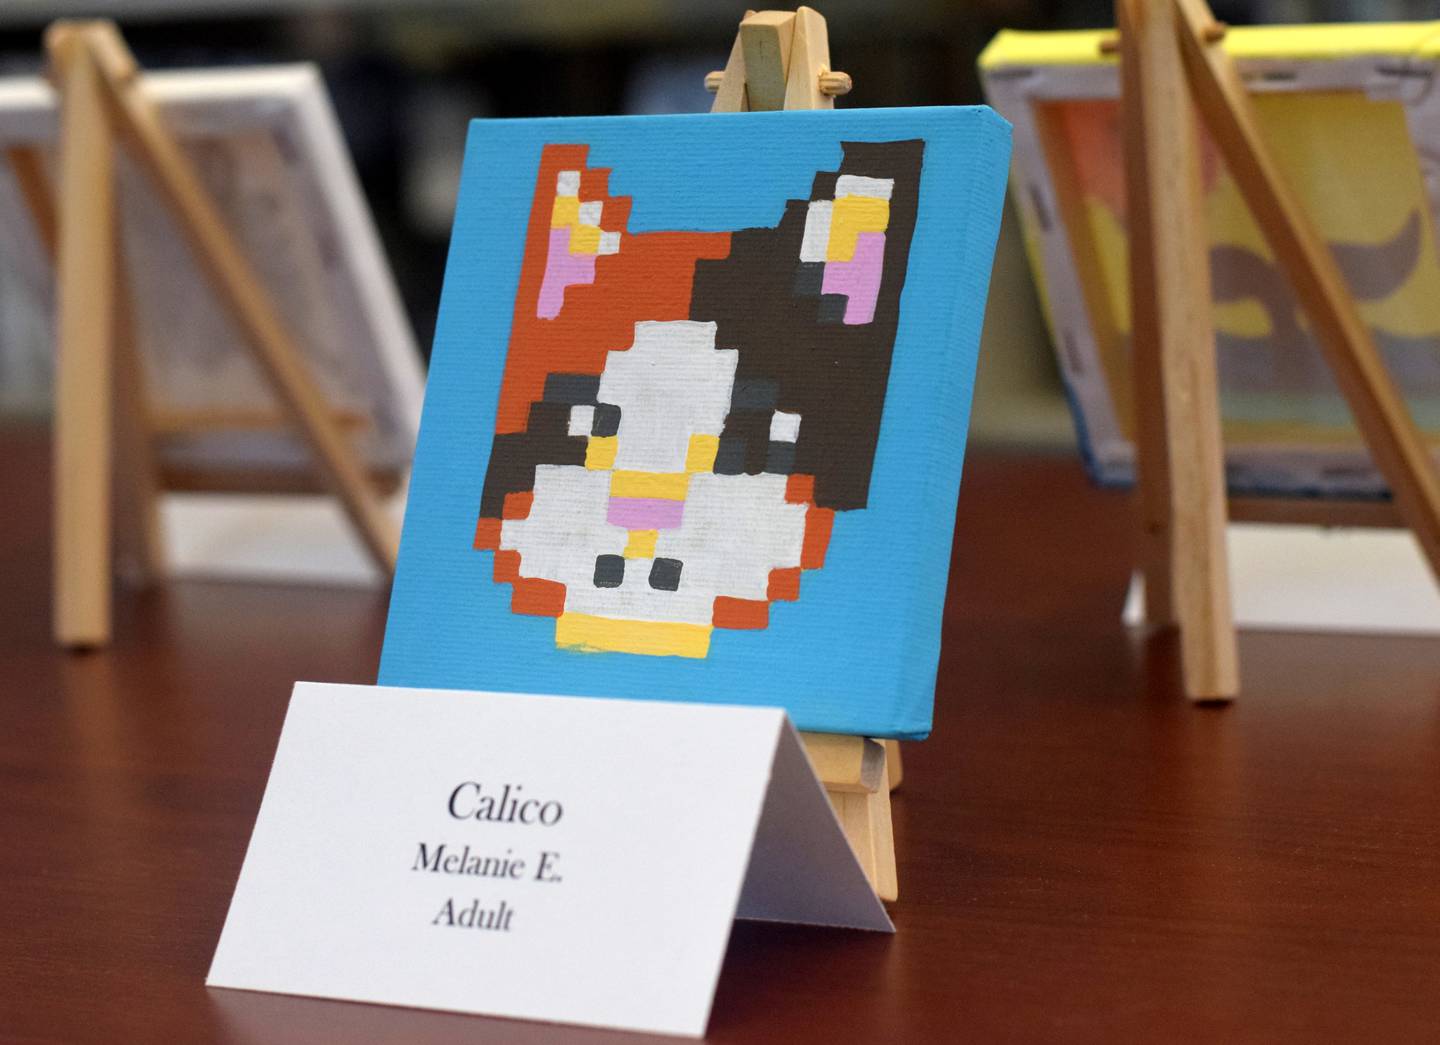 Library staff say artists ages 3 through 77 have submitted miniature artwork for the Newton Public Library's Tiny Art Show.